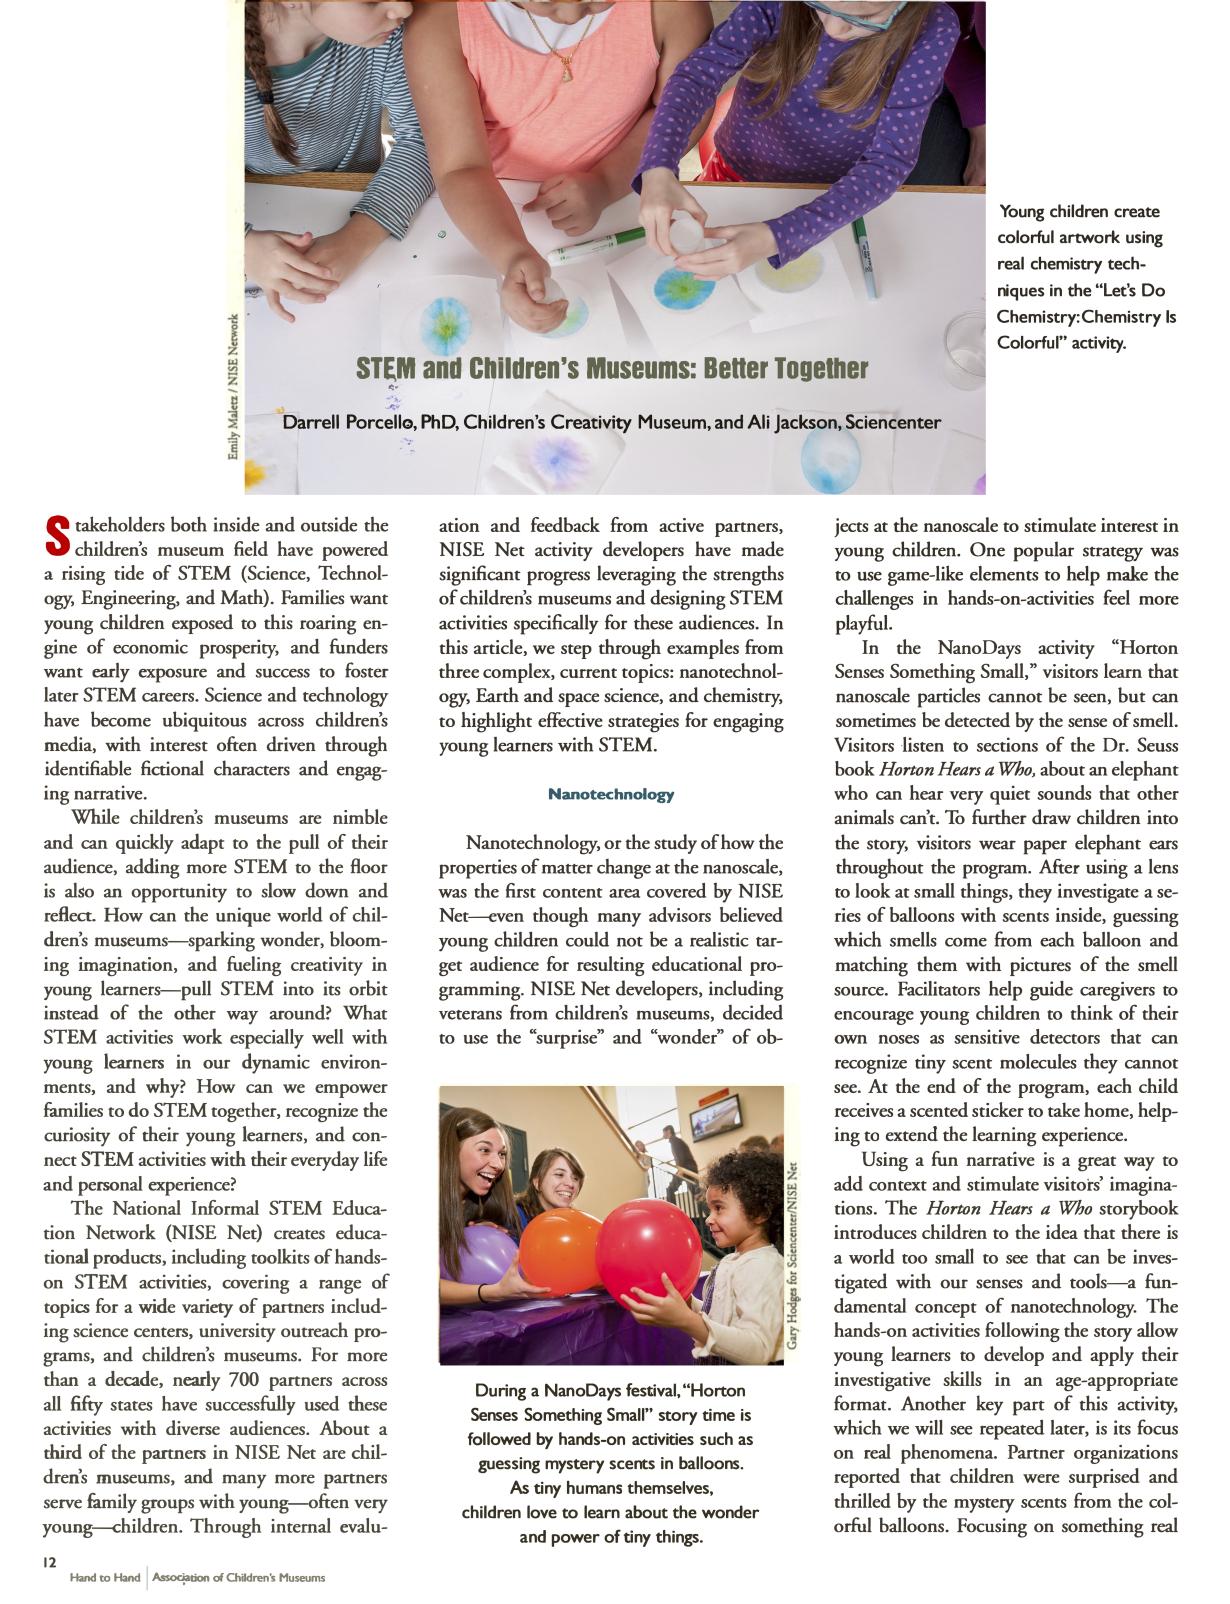 Cover page of the ACM Hand to Hand publication article entitlted STEM and Children's Museums Better Together